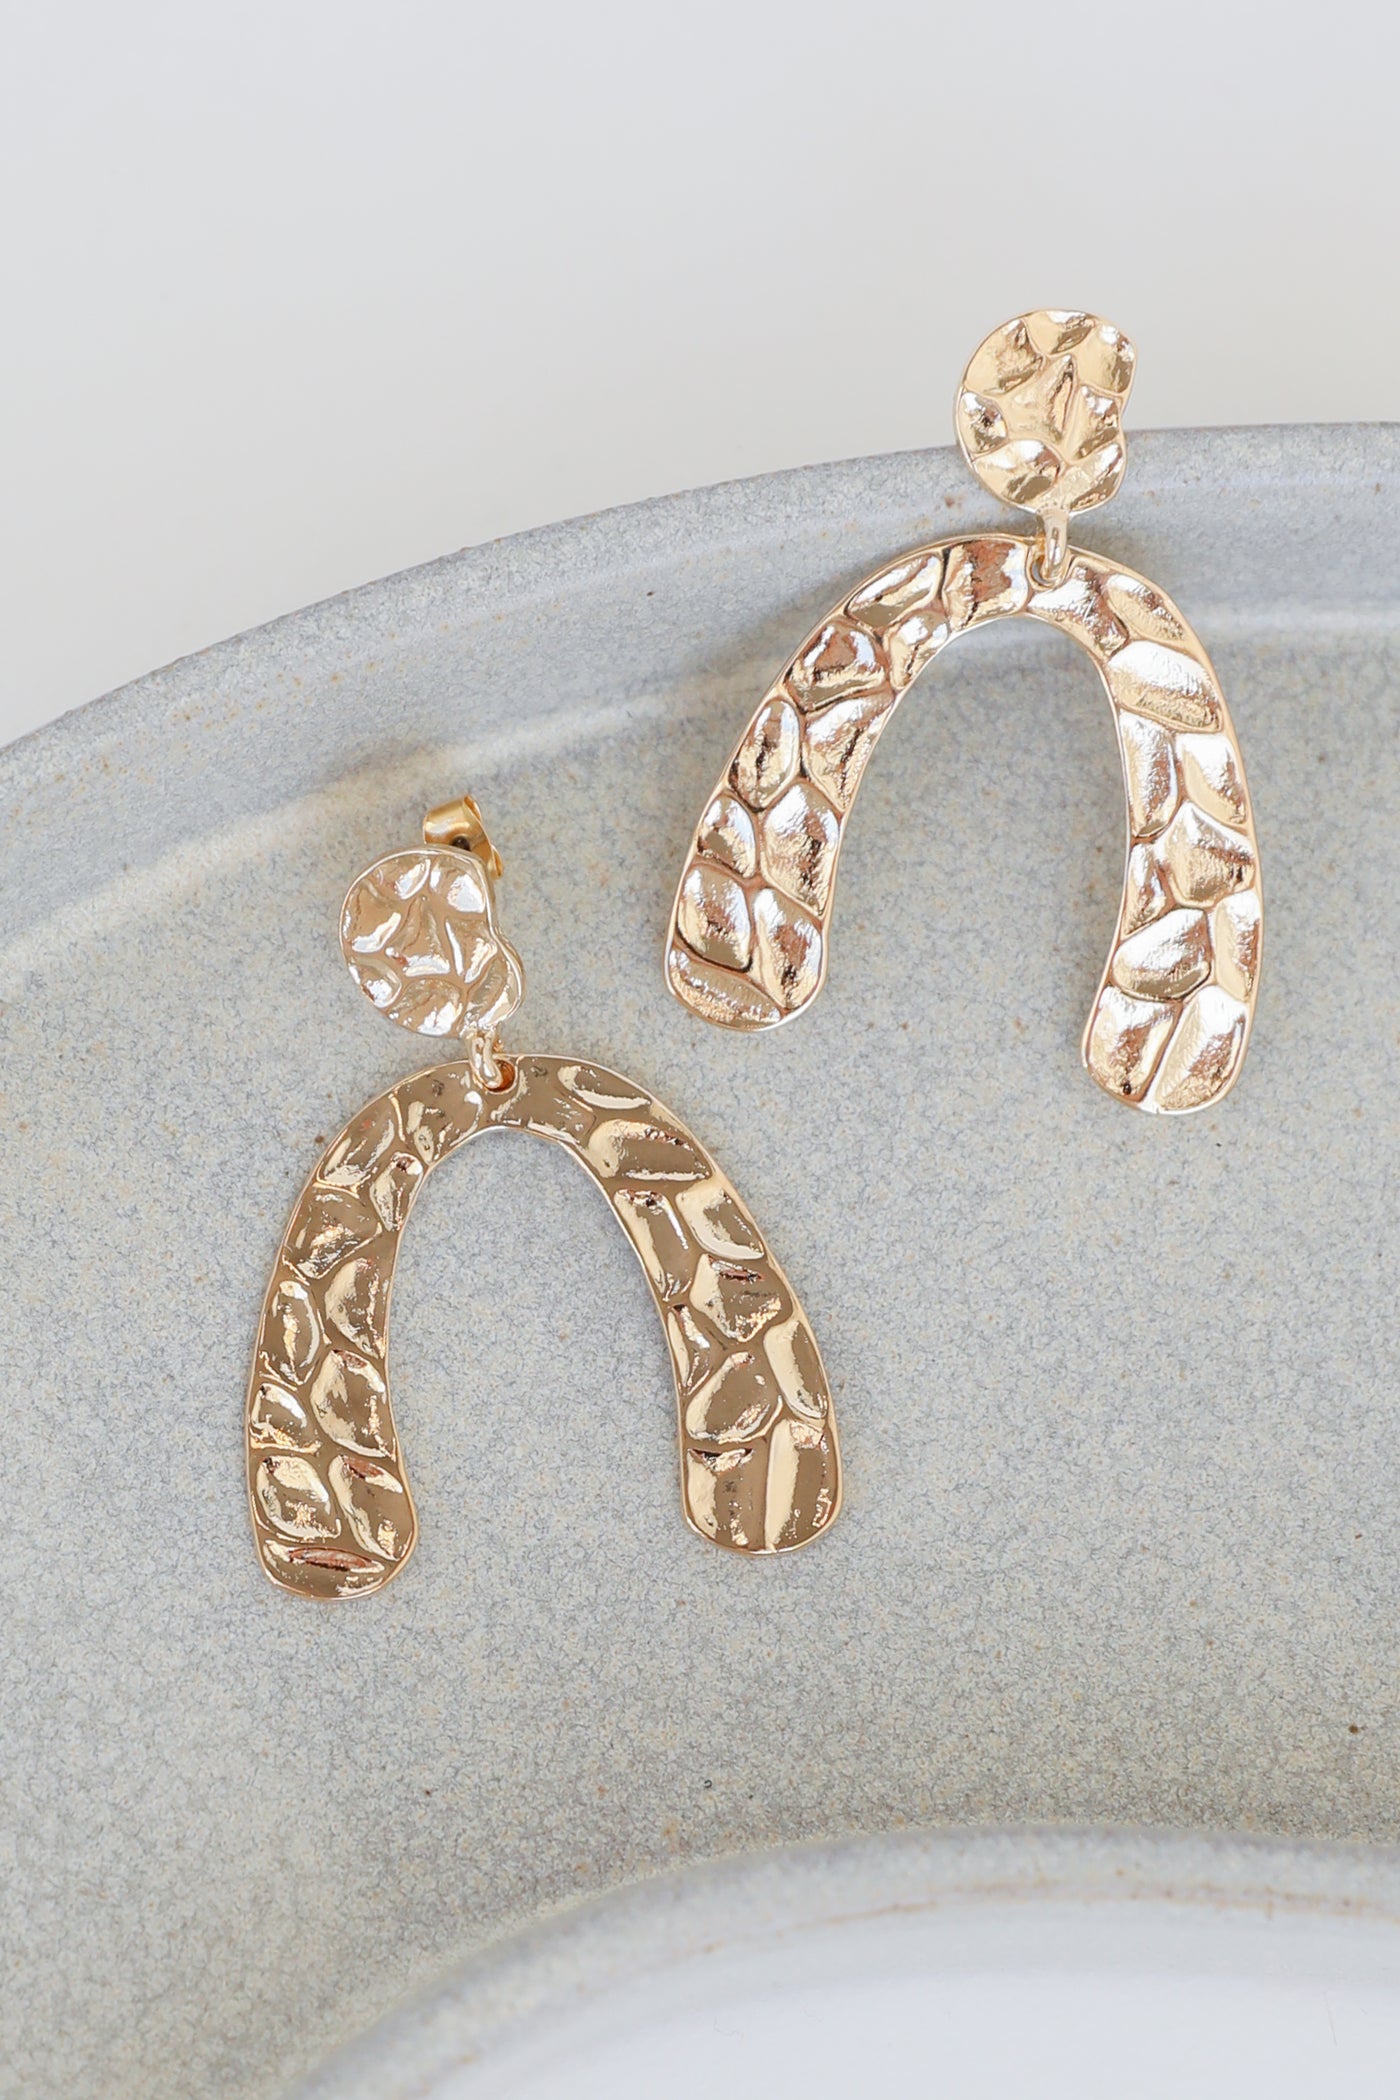 Gold Hammered Statement Earrings close up